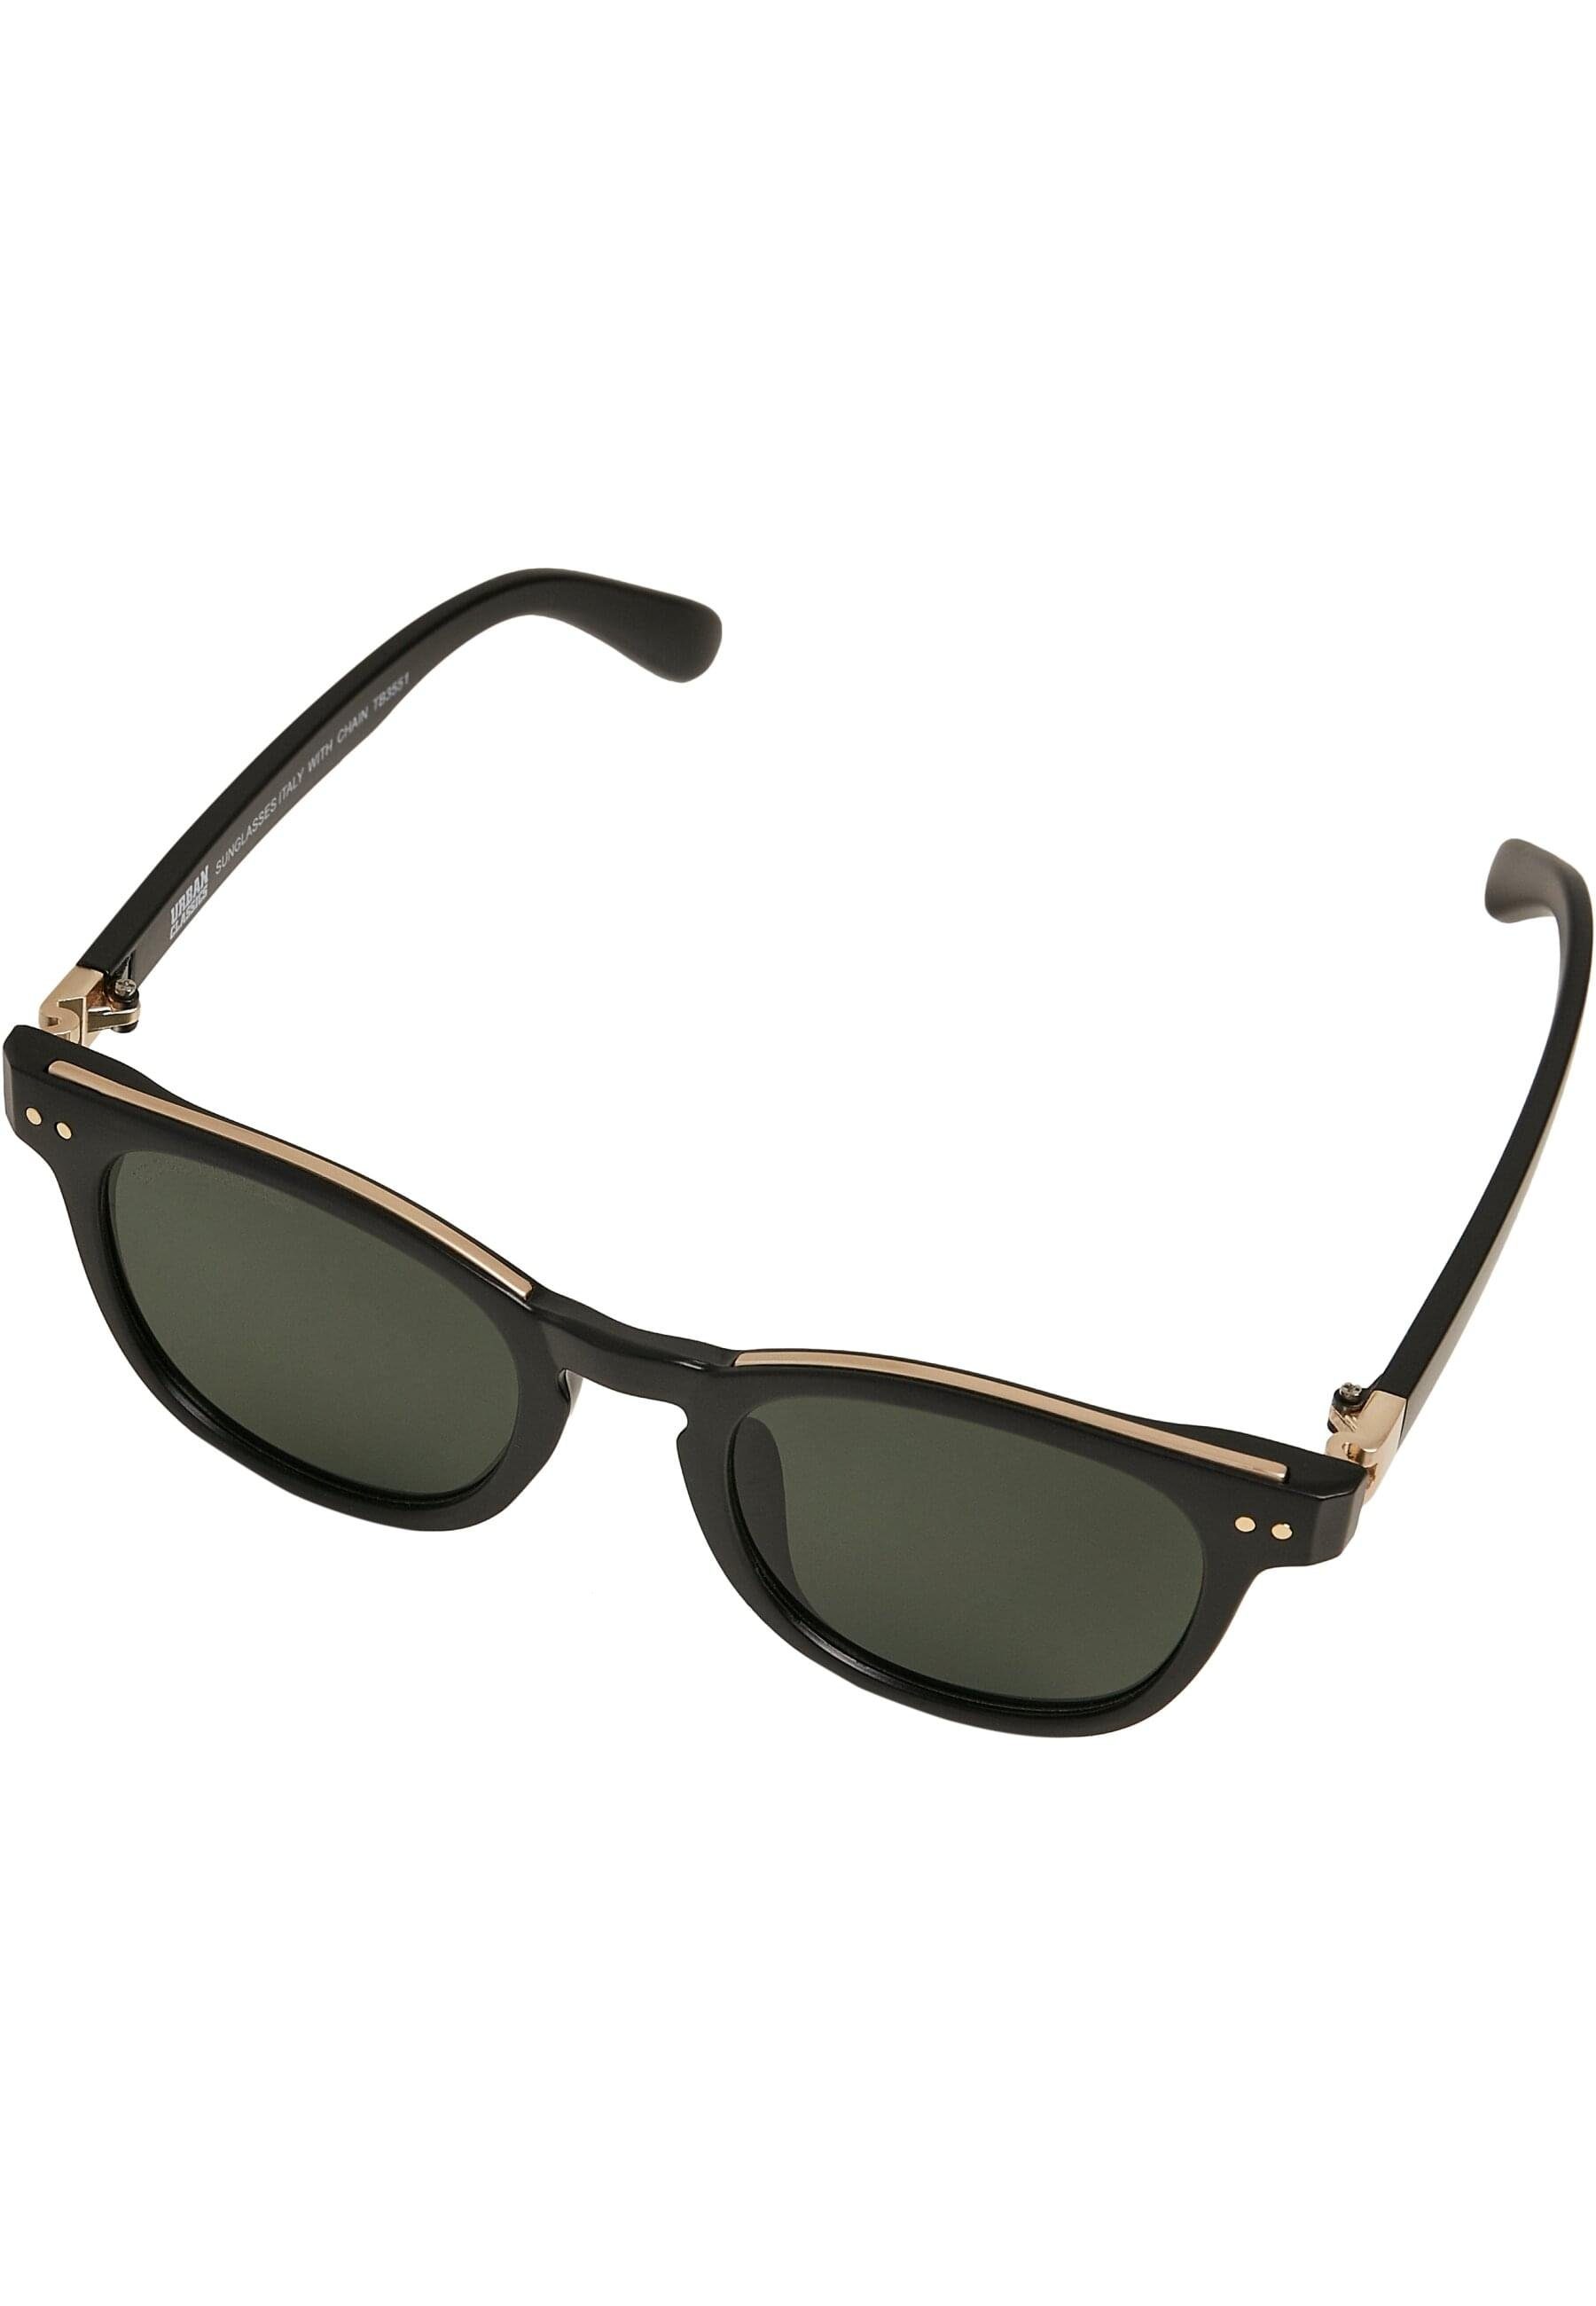 chain Italy CLASSICS with Sonnenbrille URBAN Unisex Sunglasses black/gold/gold